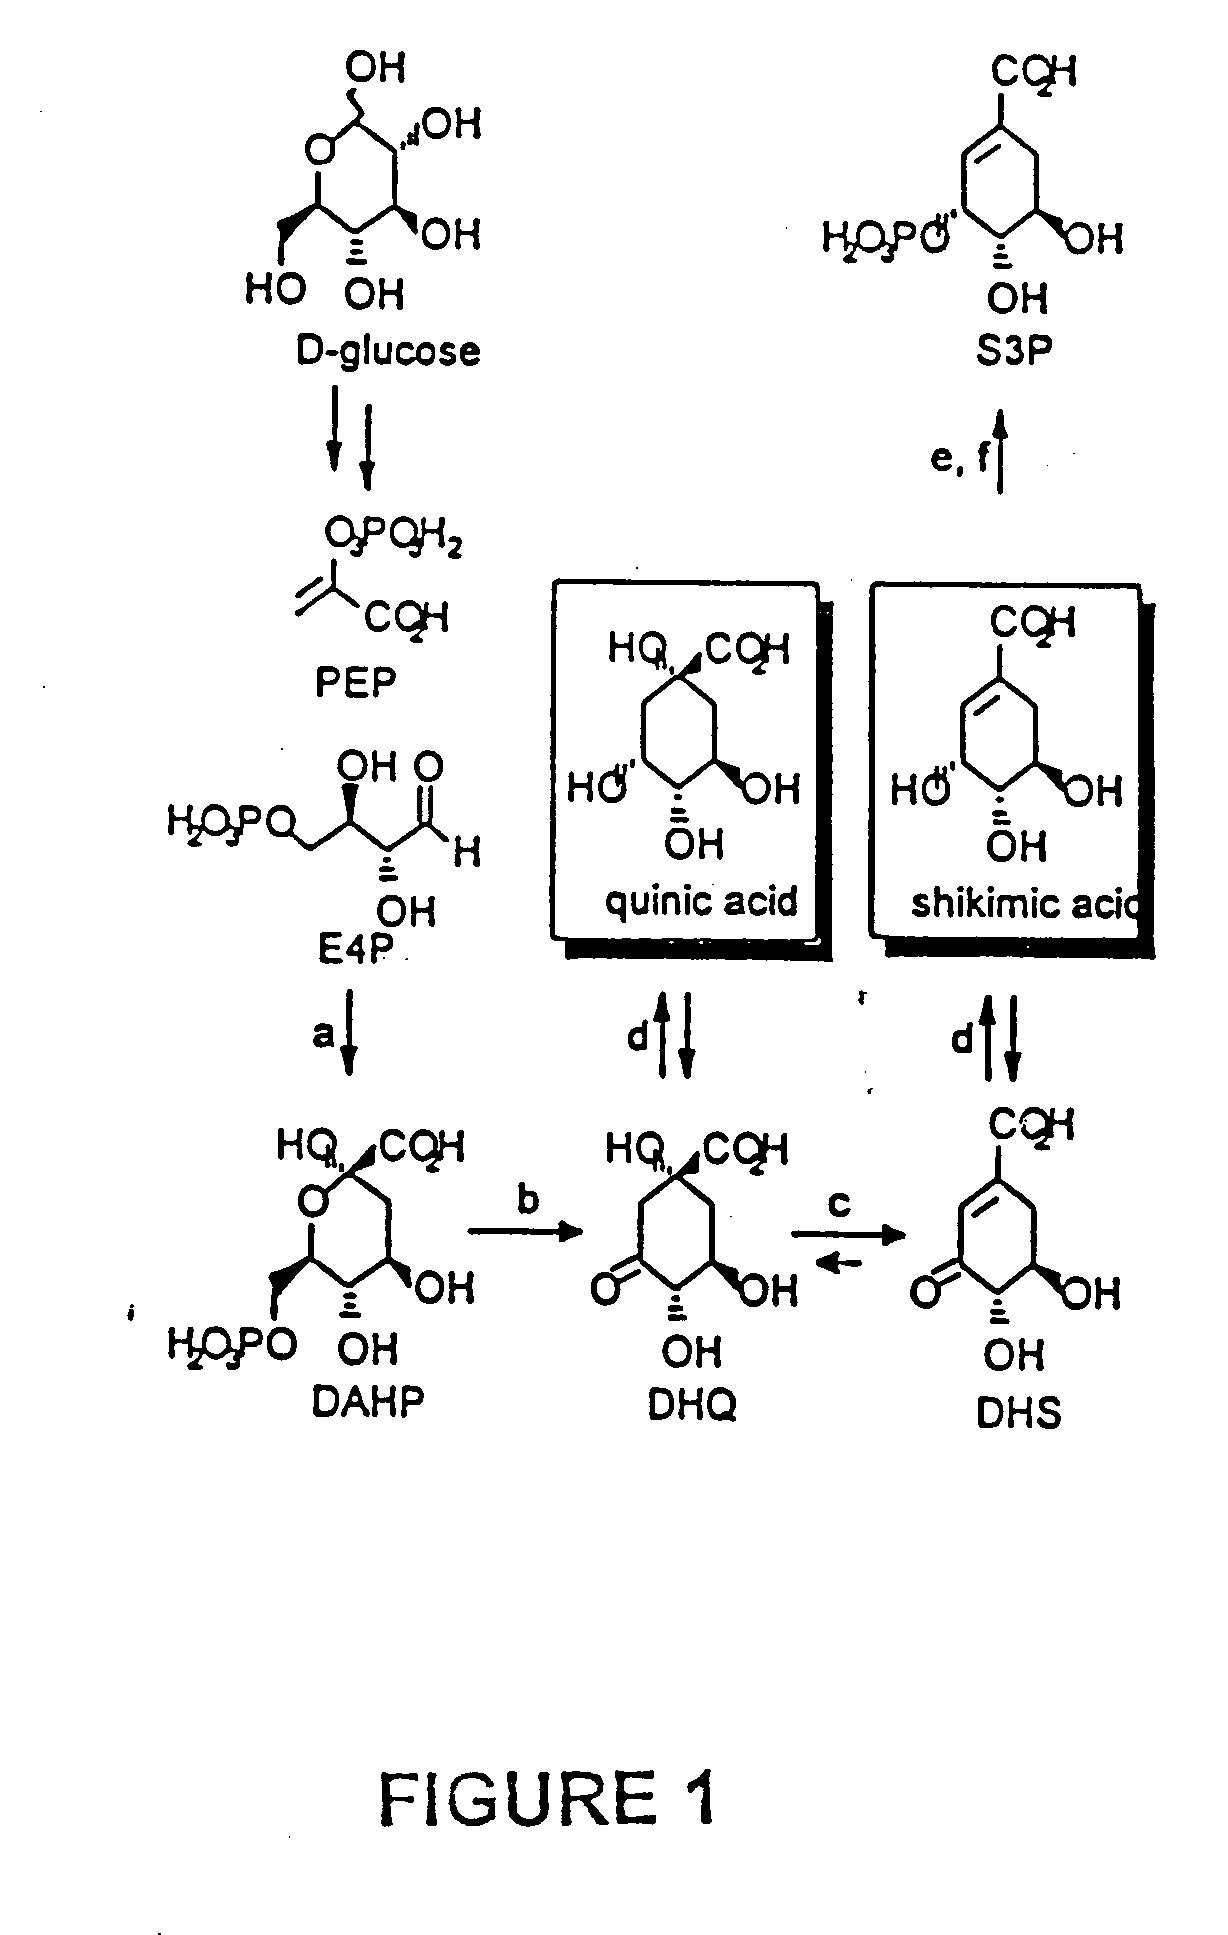 Biocatalytic synthesis of quinic acid and conversion to hydroquinone